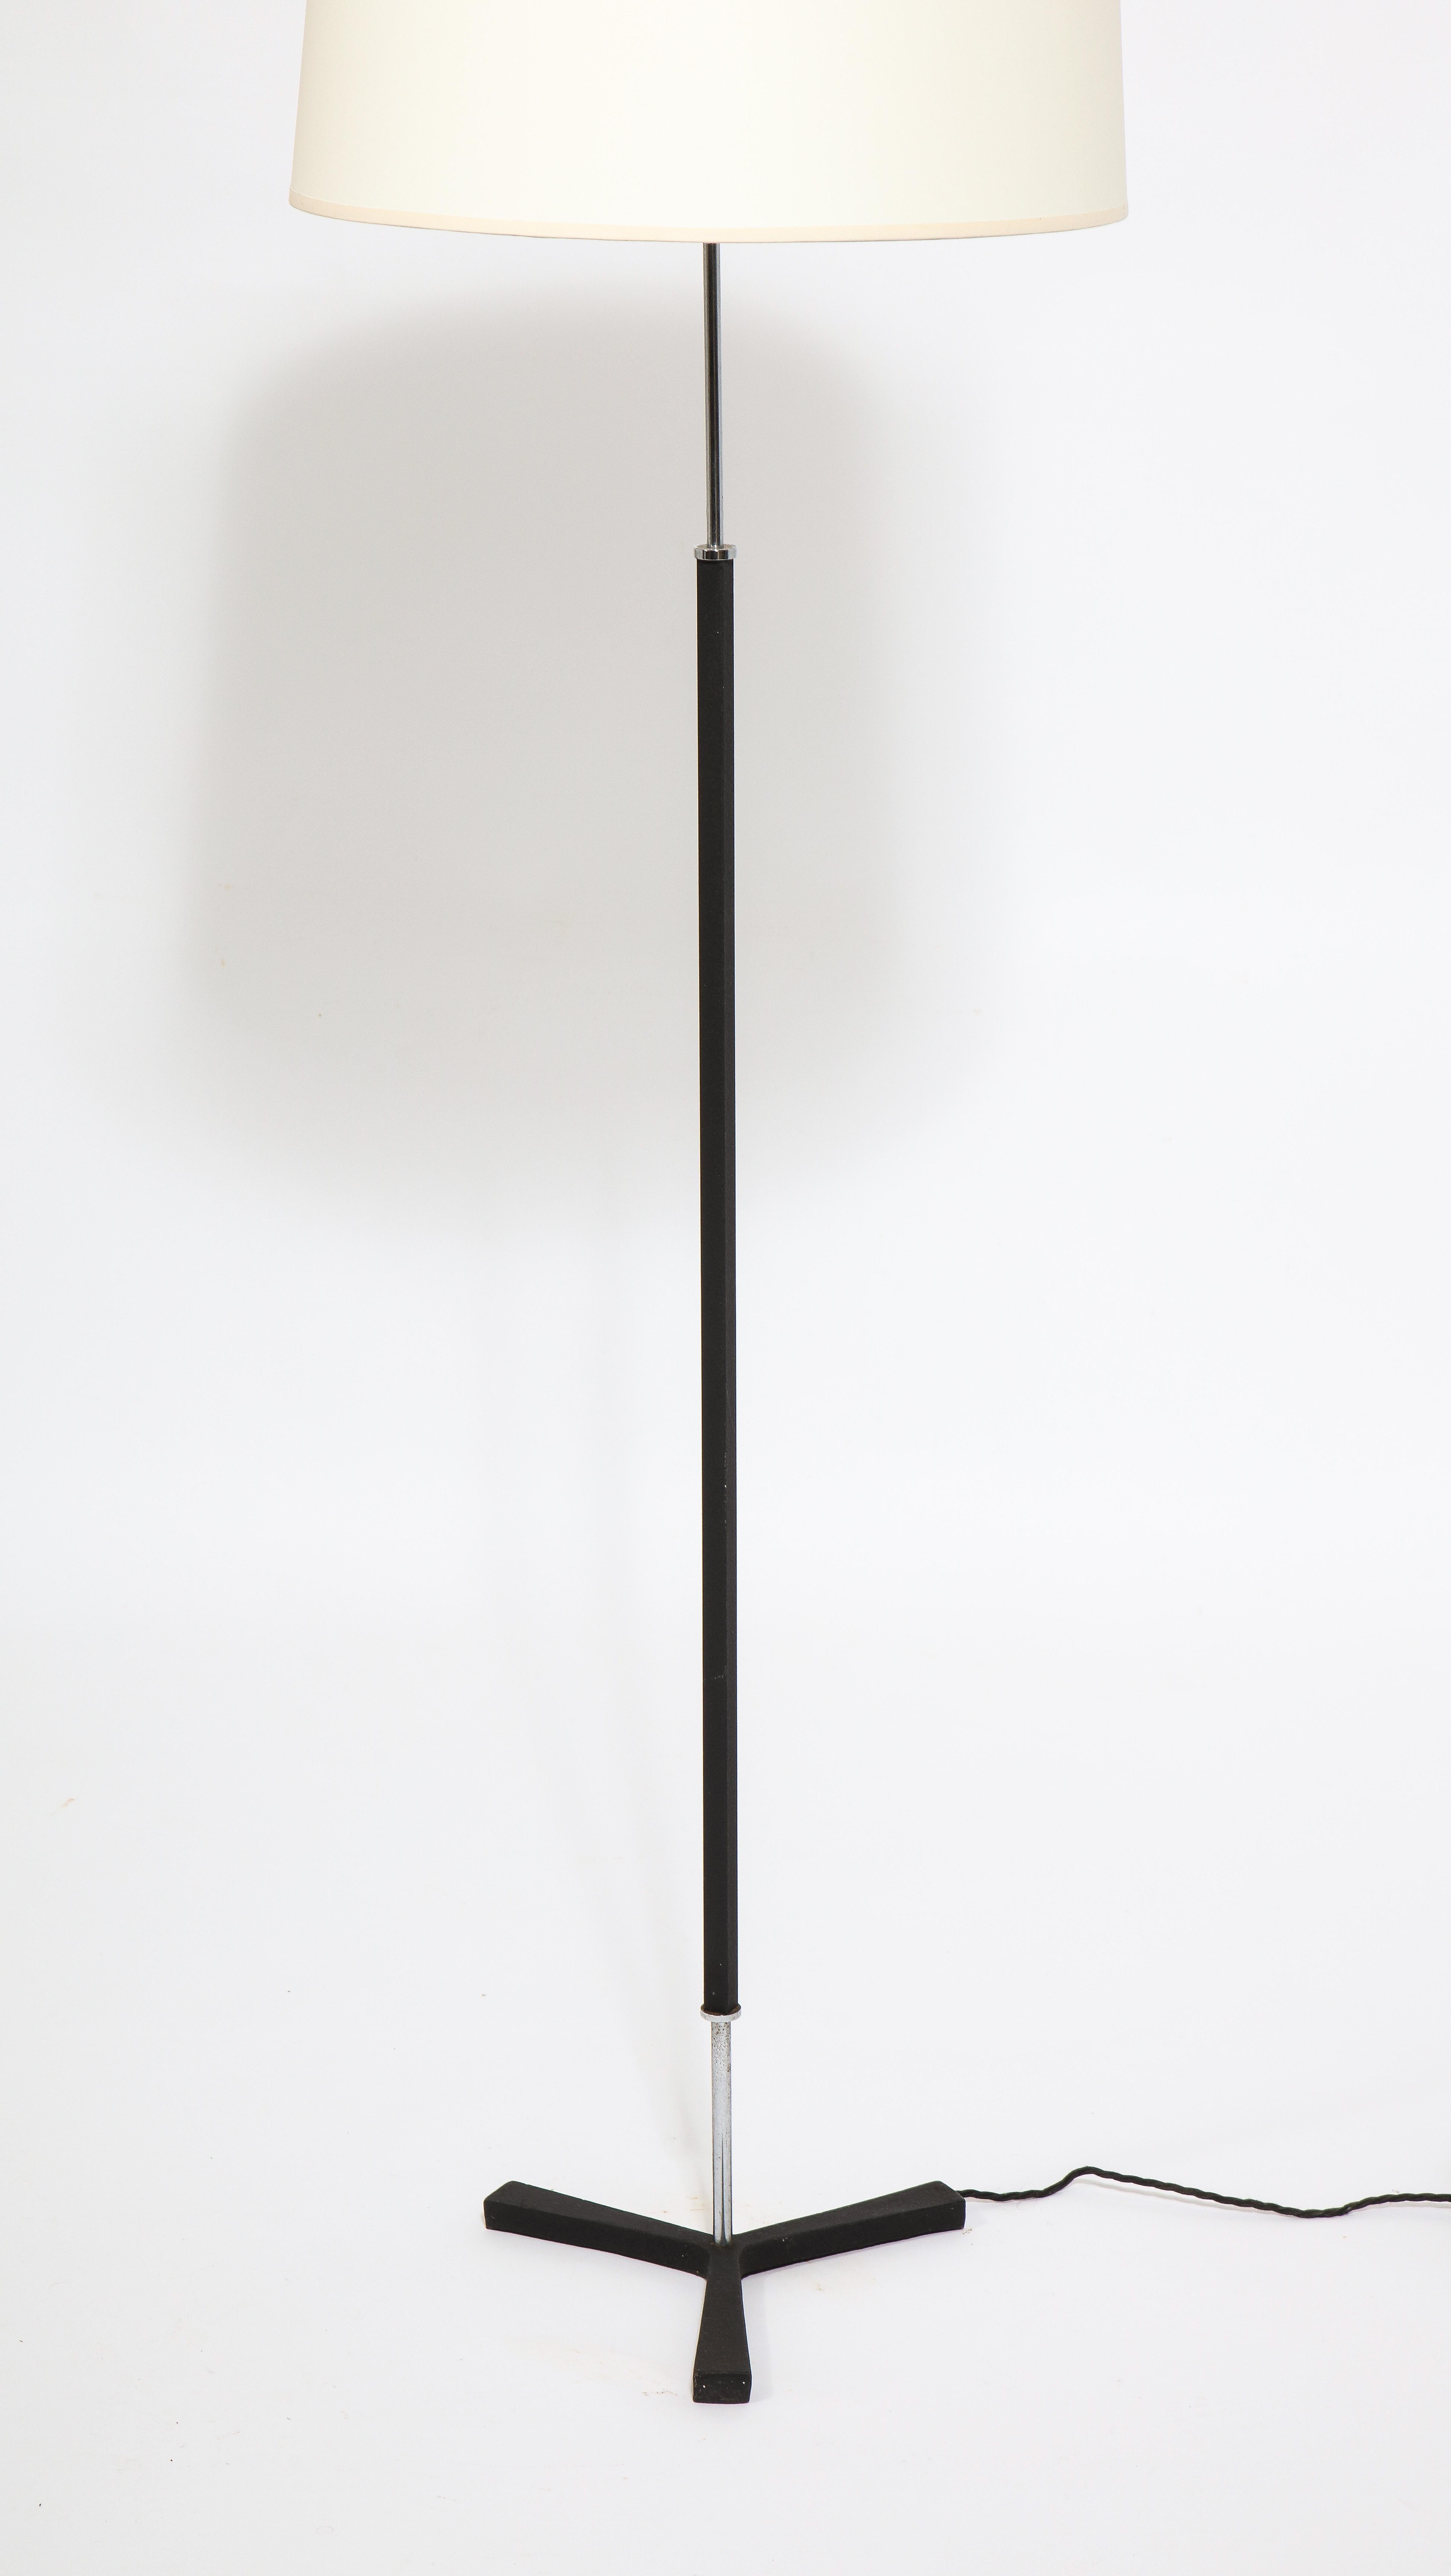 A minimal tripod floor lamp in blackened and chromed steel. Lampshade not included.